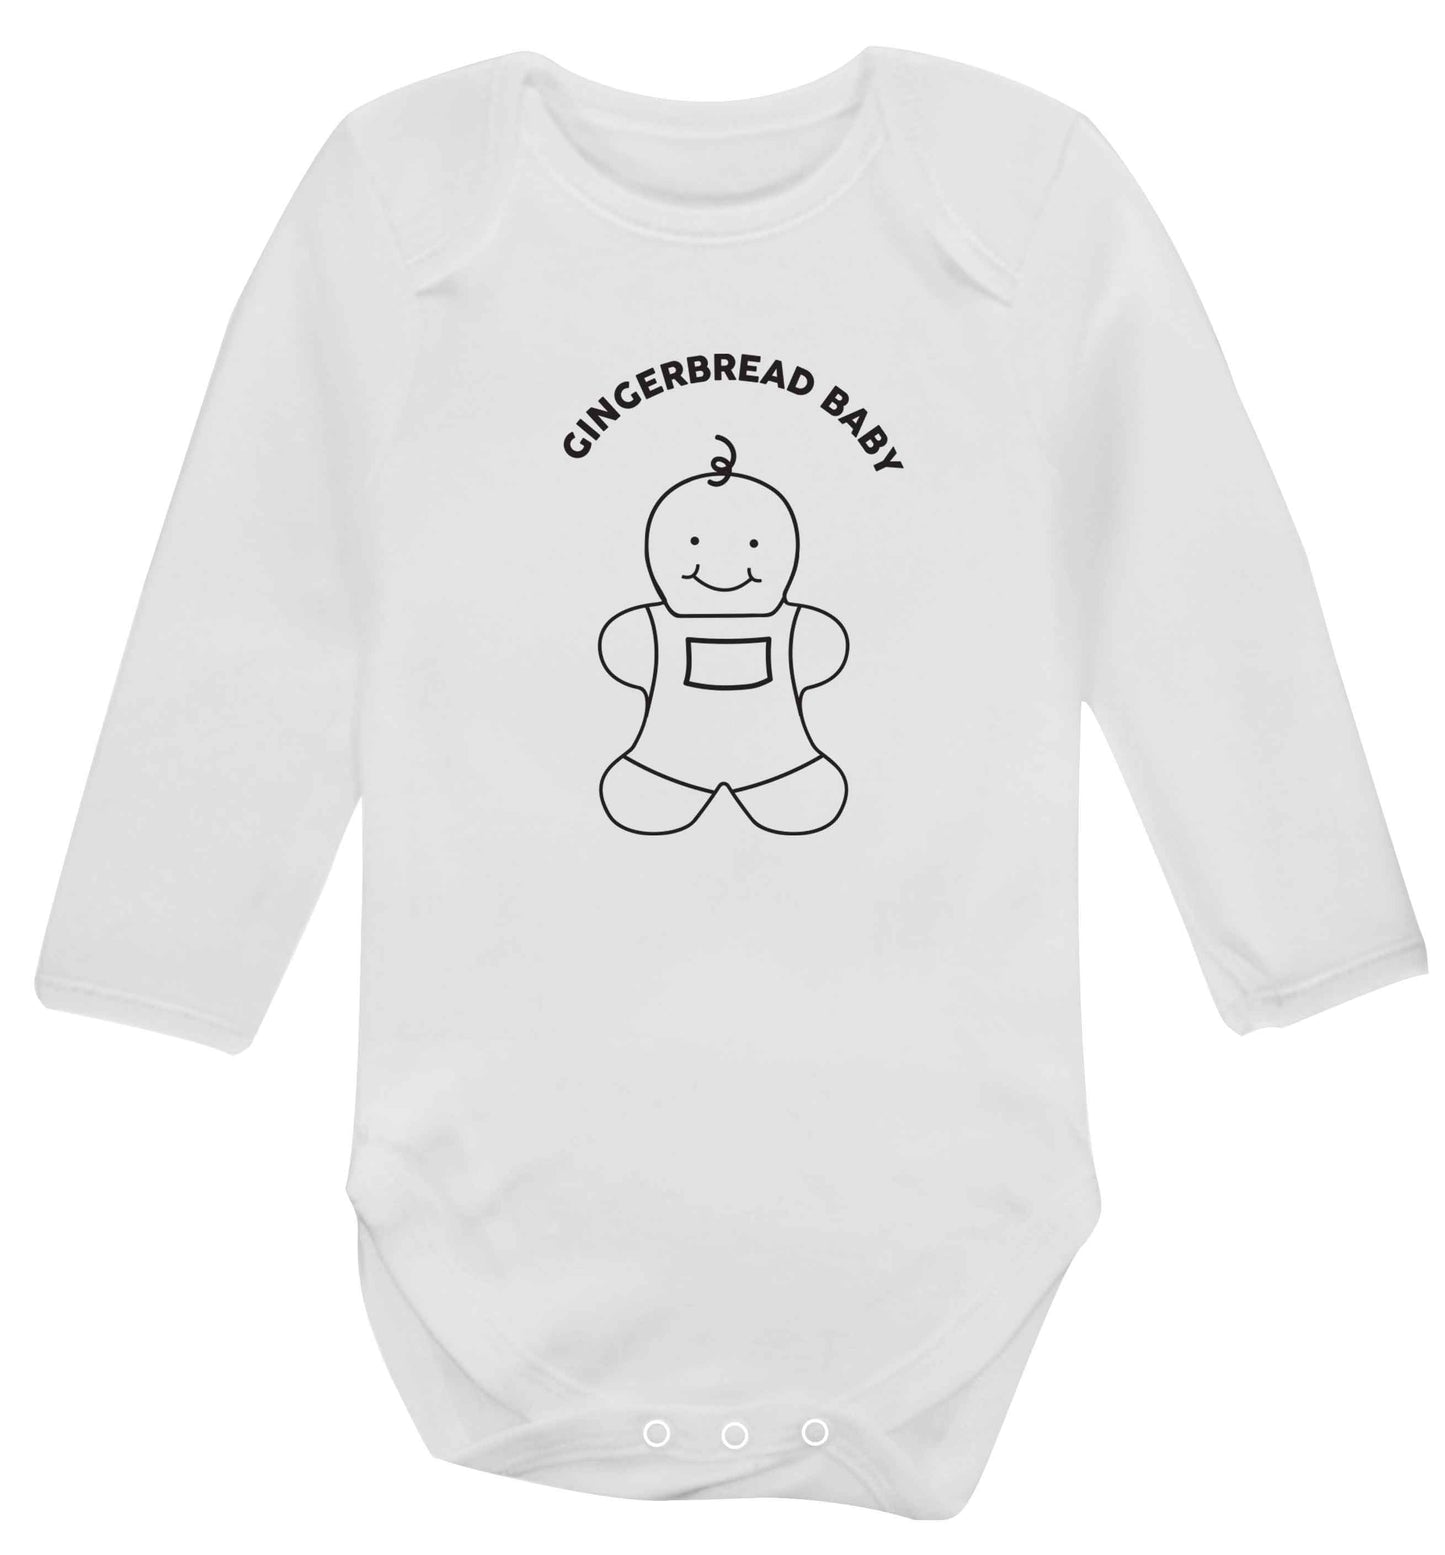 Gingerbread baby baby vest long sleeved white 6-12 months